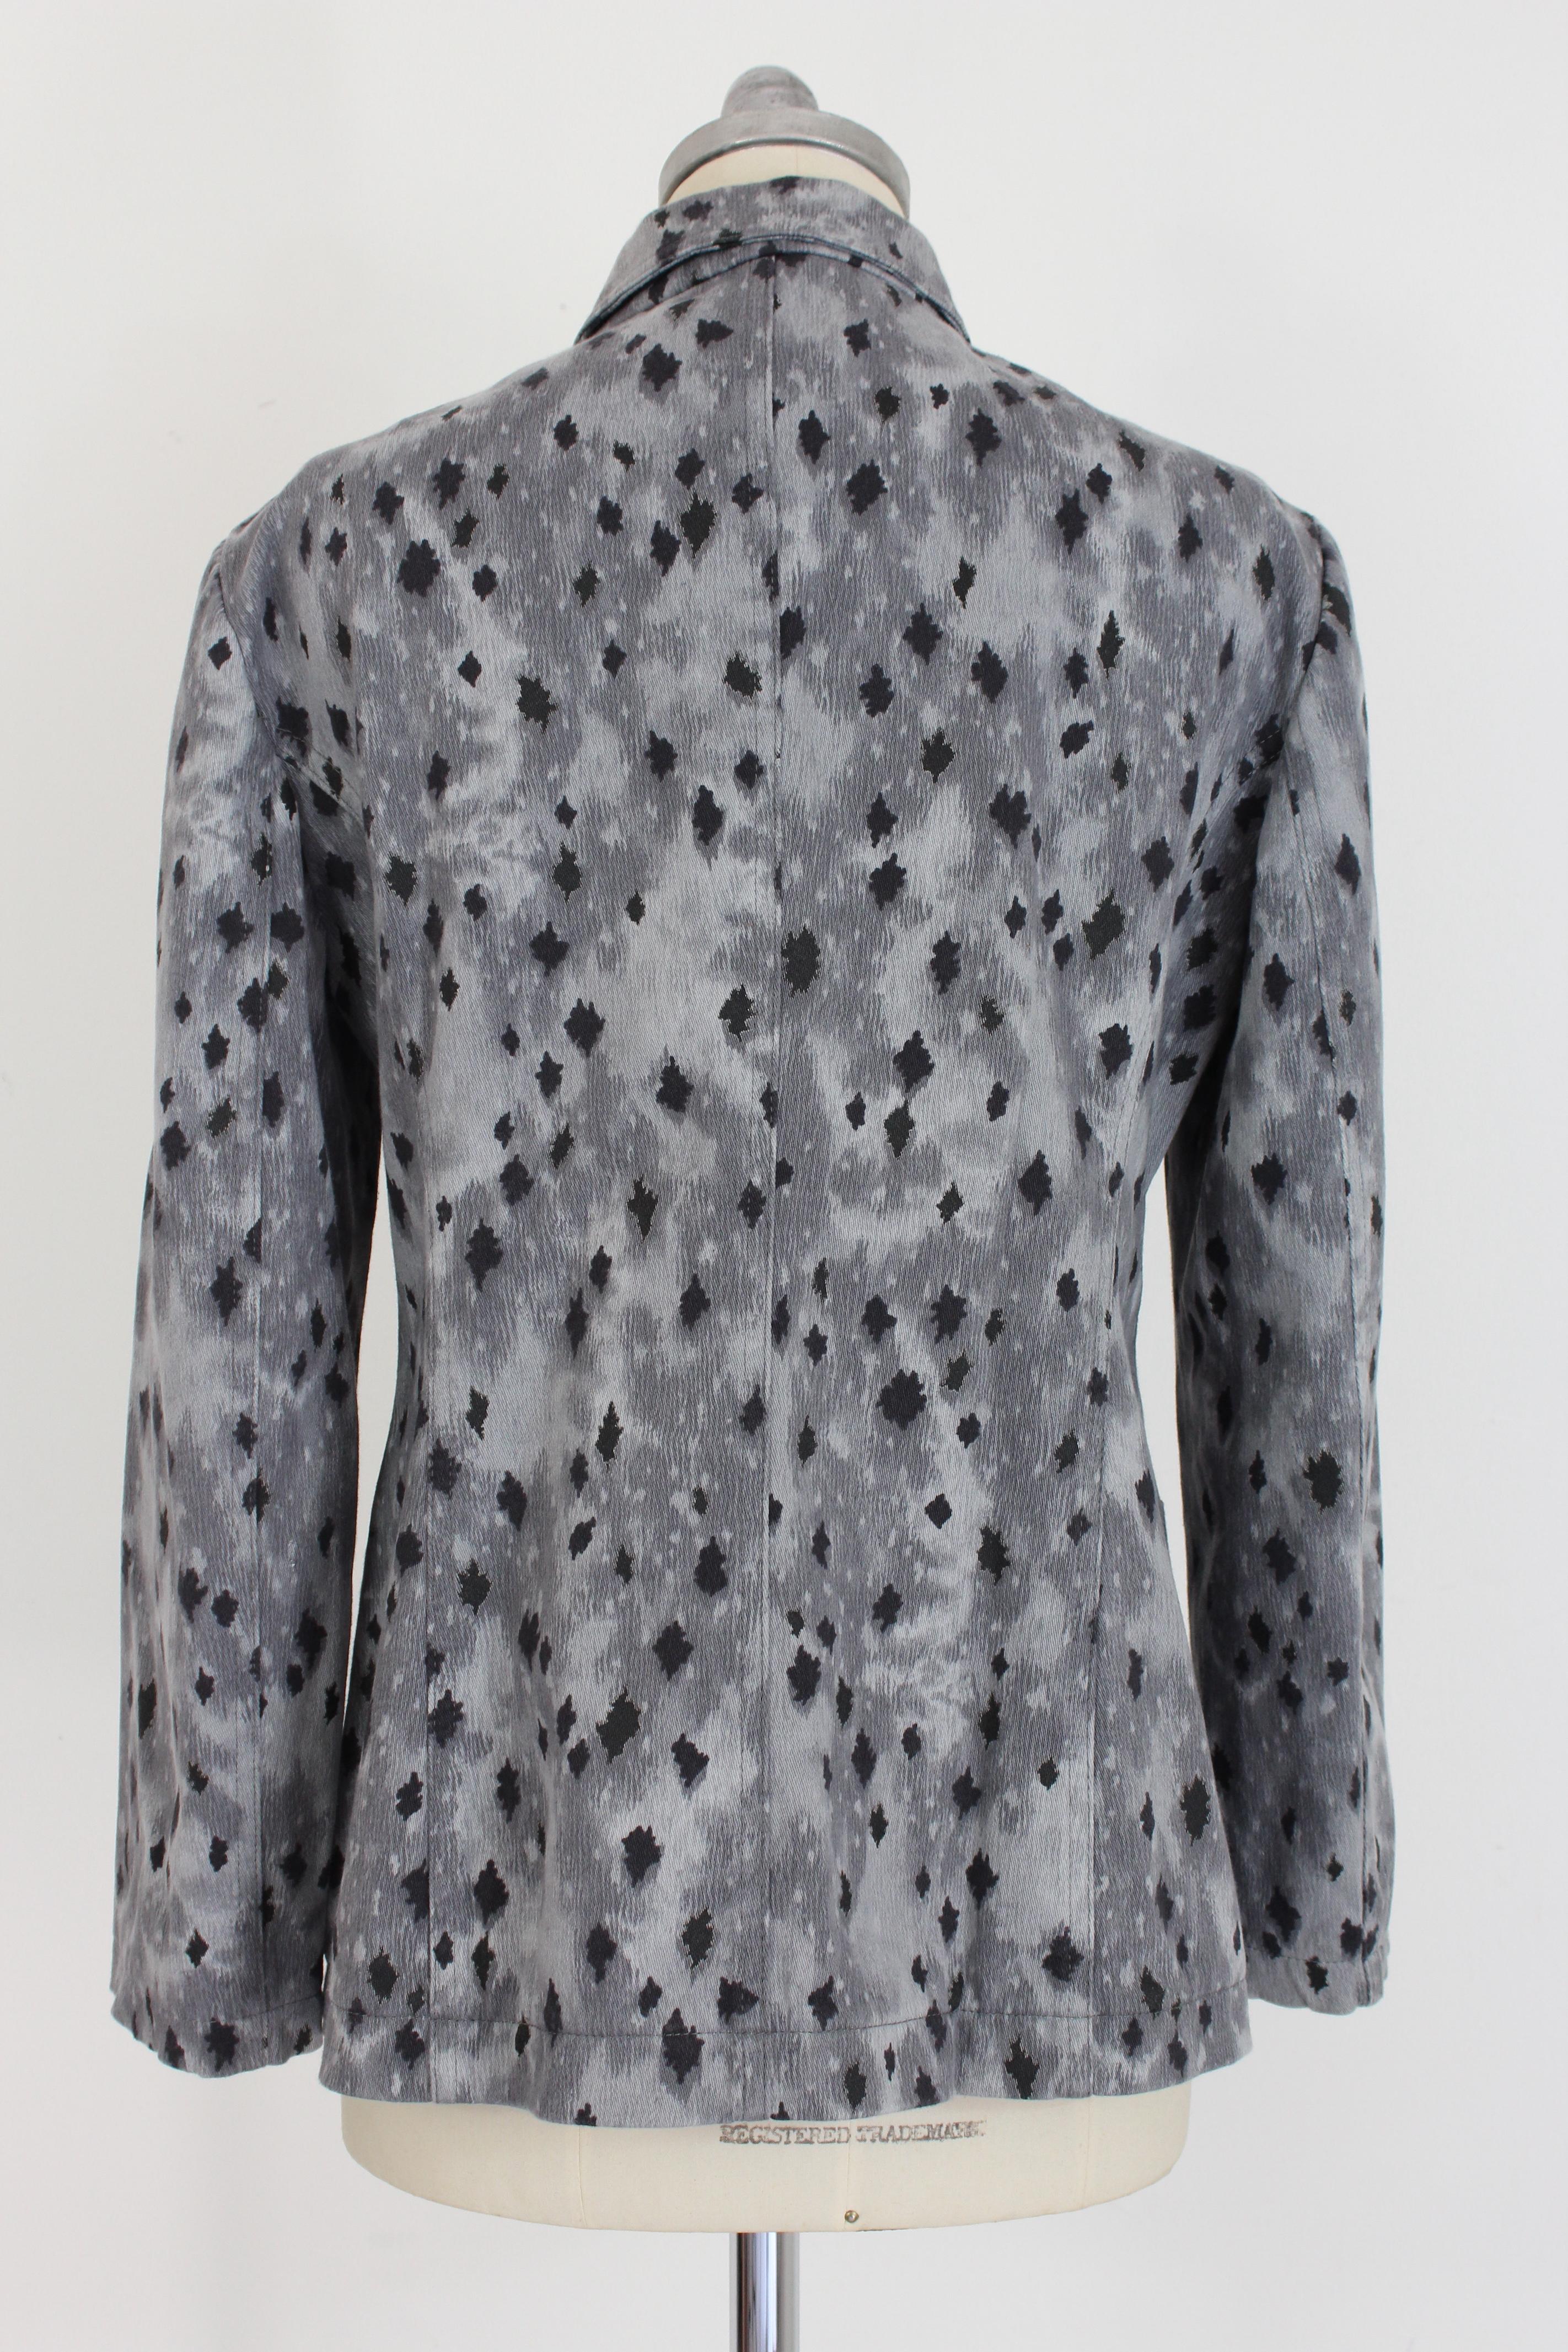 Krizia Jeans vintage 80s women's jacket. Gray and black blazer with spotted print. 97% cotton, 3% elastane fabric. Inside there is the lining in the shoulder part. Made in Italy.

Condition: Excellent

Article used few times, it remains in its